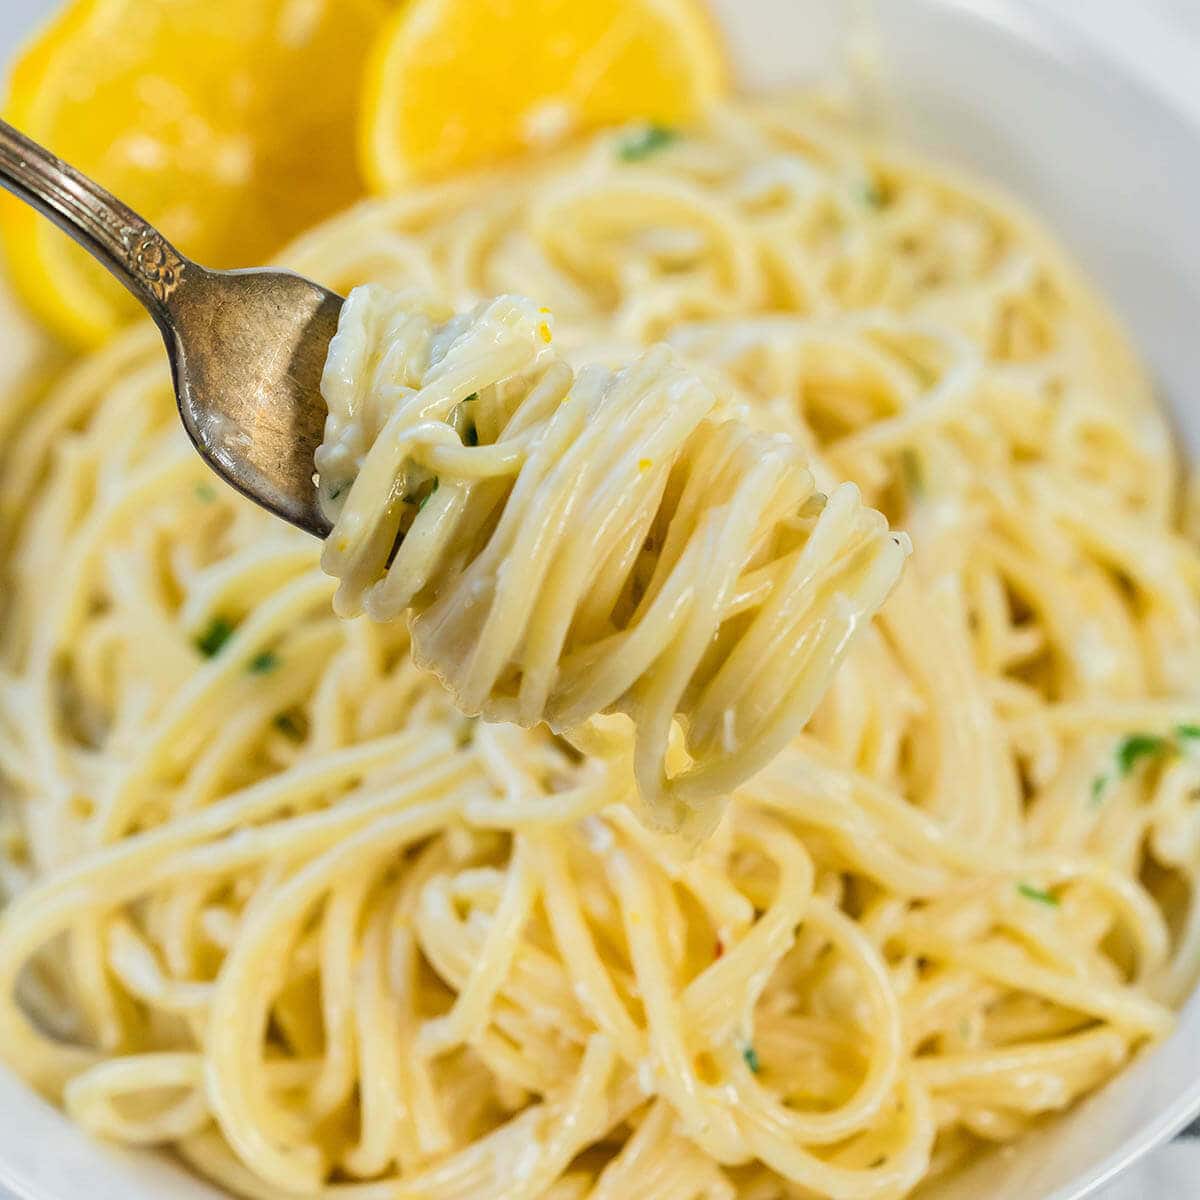 A bowl of lemon pasta served with slices of lemon. A fork has twirled a big serving around it, ready to eat!